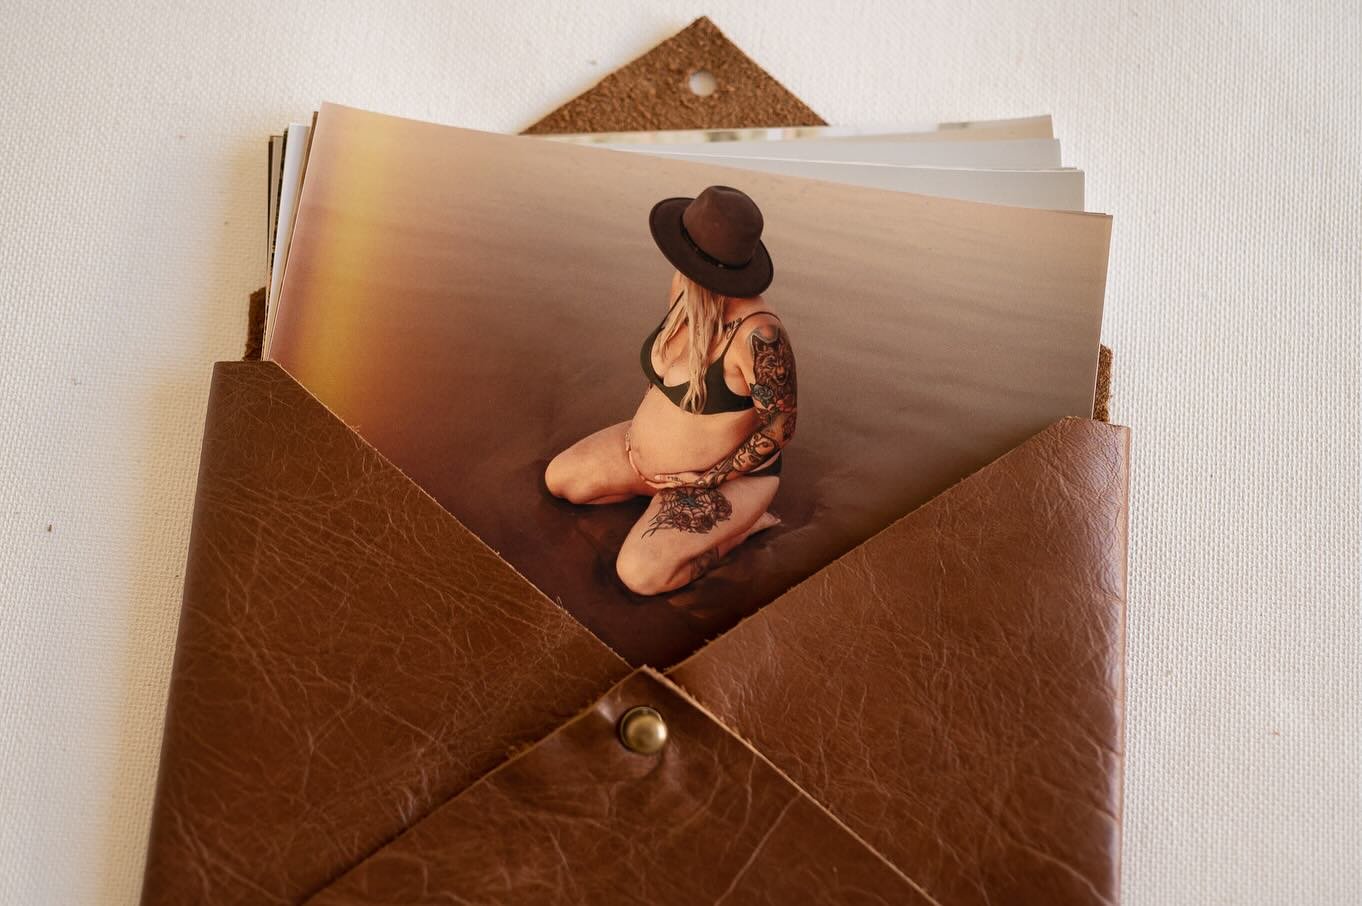 Matte art prints and our beautiful leather envelope 🤍
Printed and handmade at a high quality, Australian lab.
These products and more are available to all my clients, within their galleries ✨